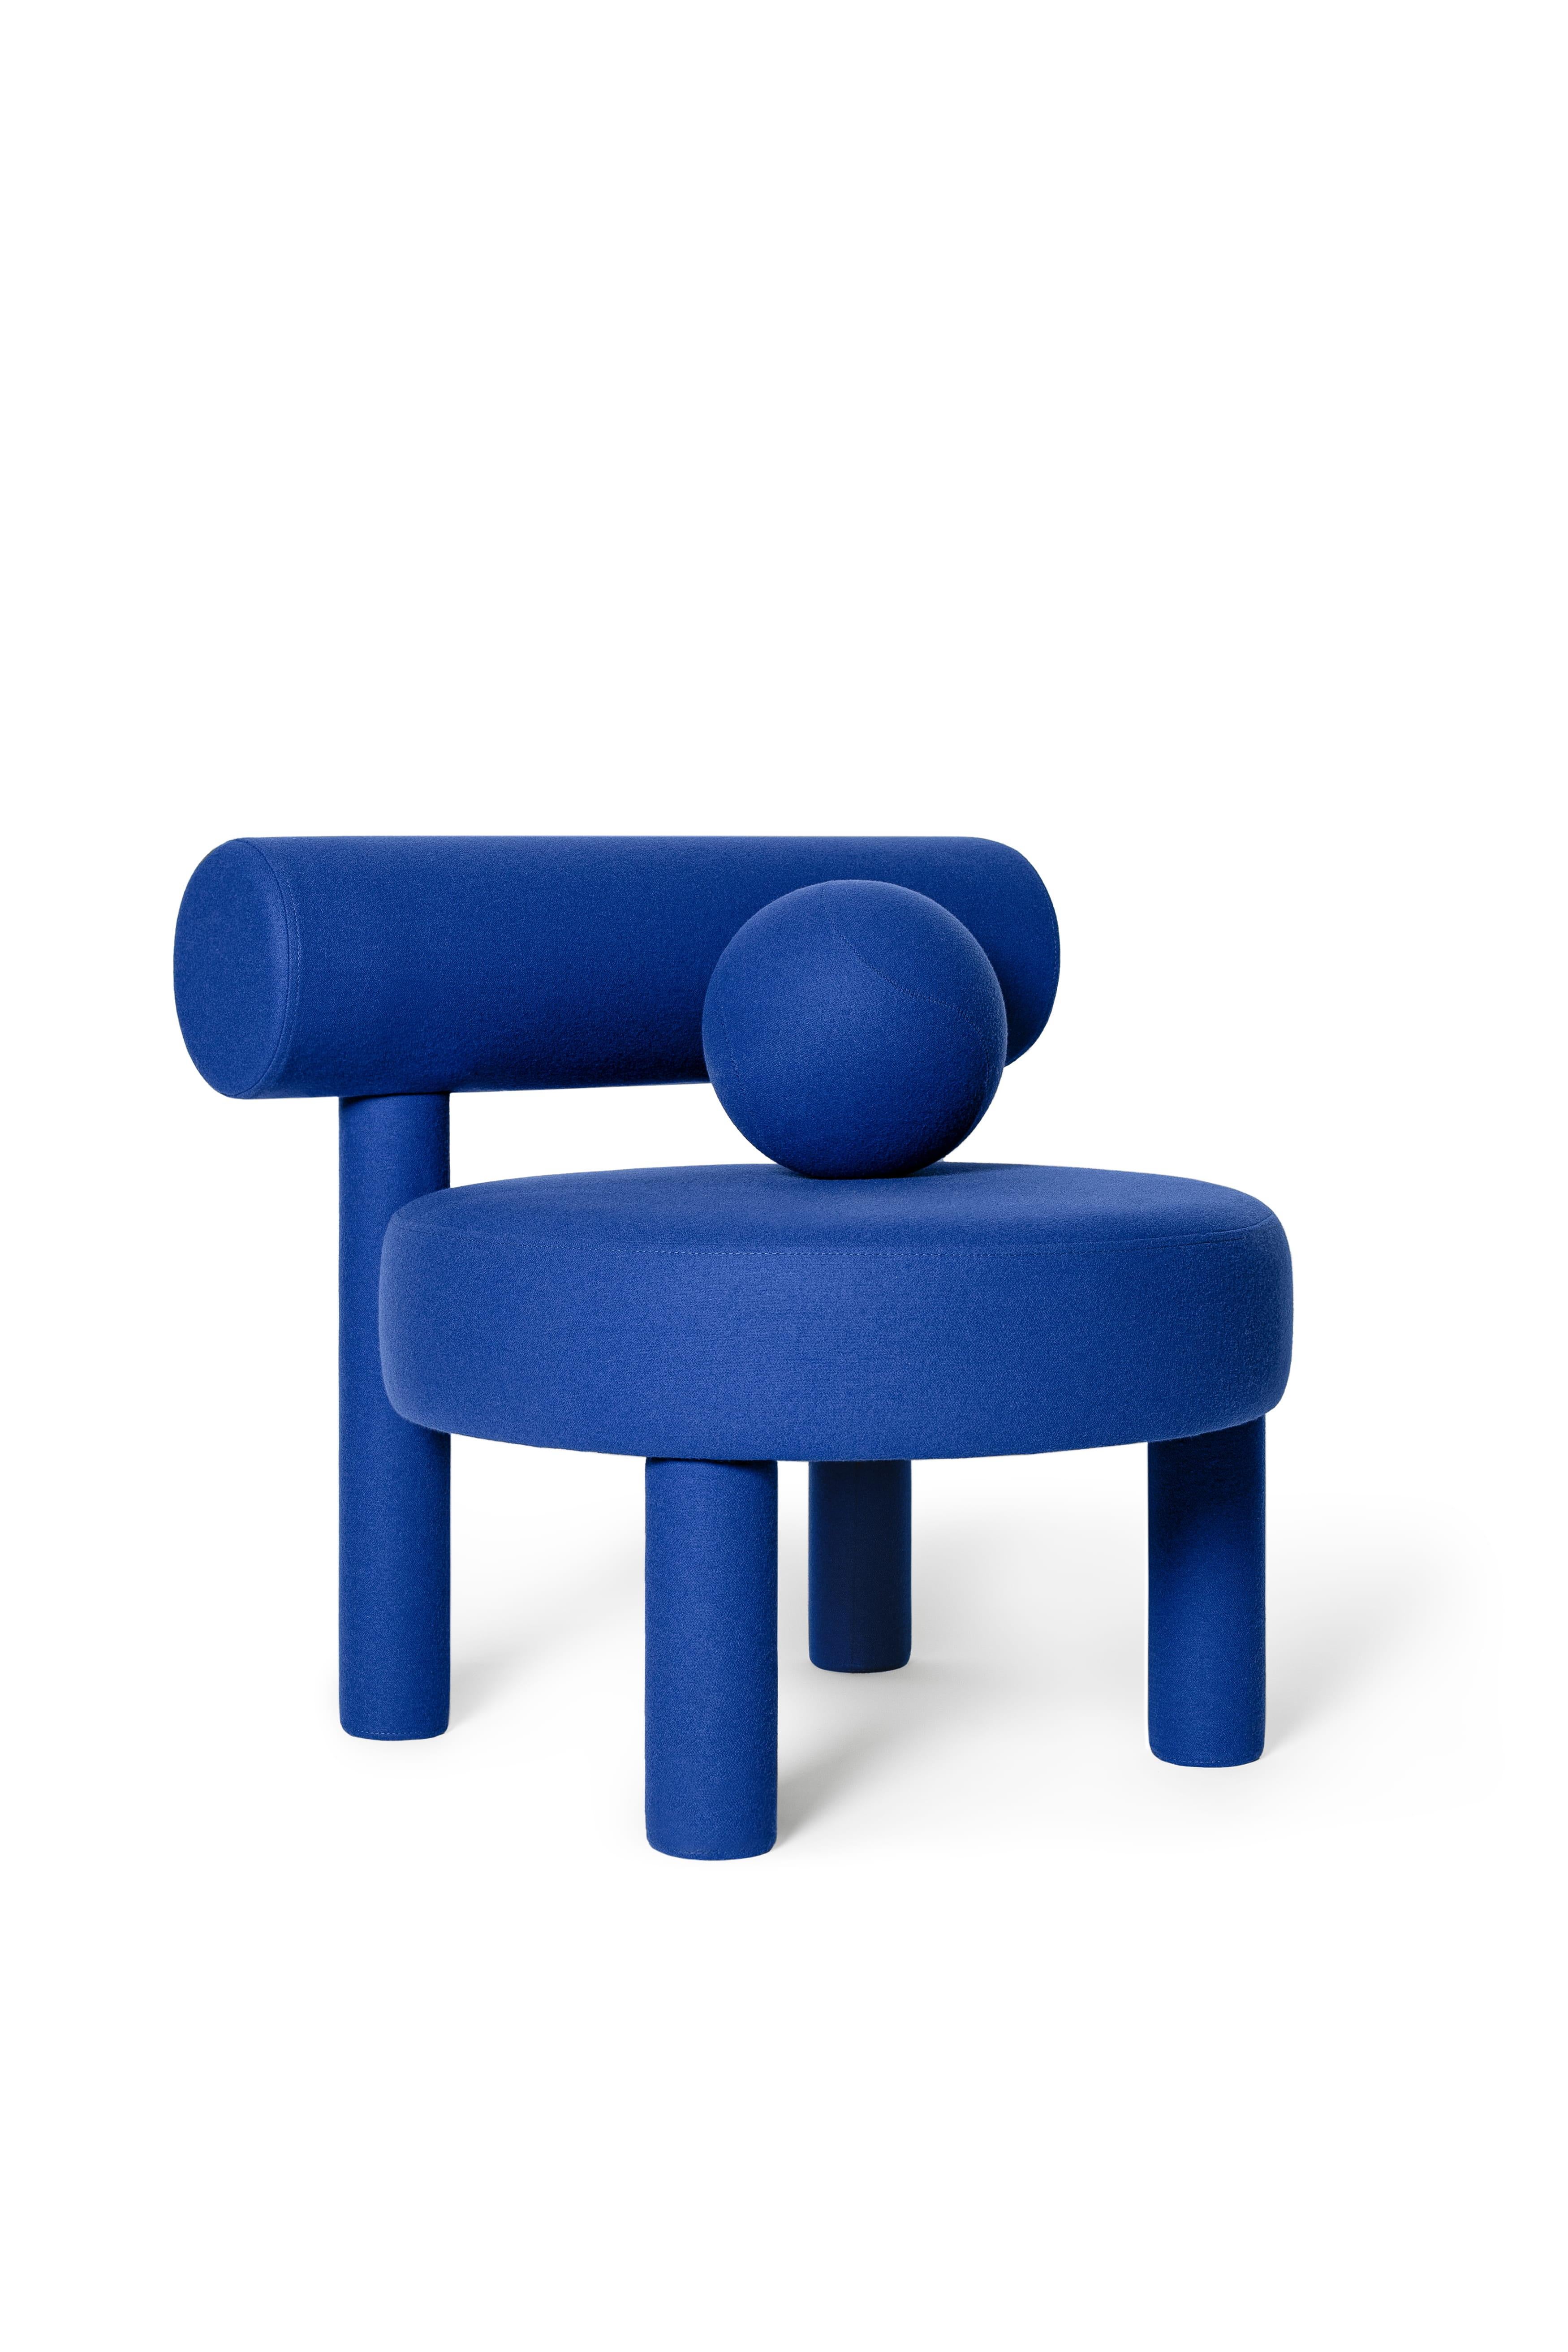 Modern Low Chair 'GROPIUS CS1' by NOOM, Blue For Sale 1